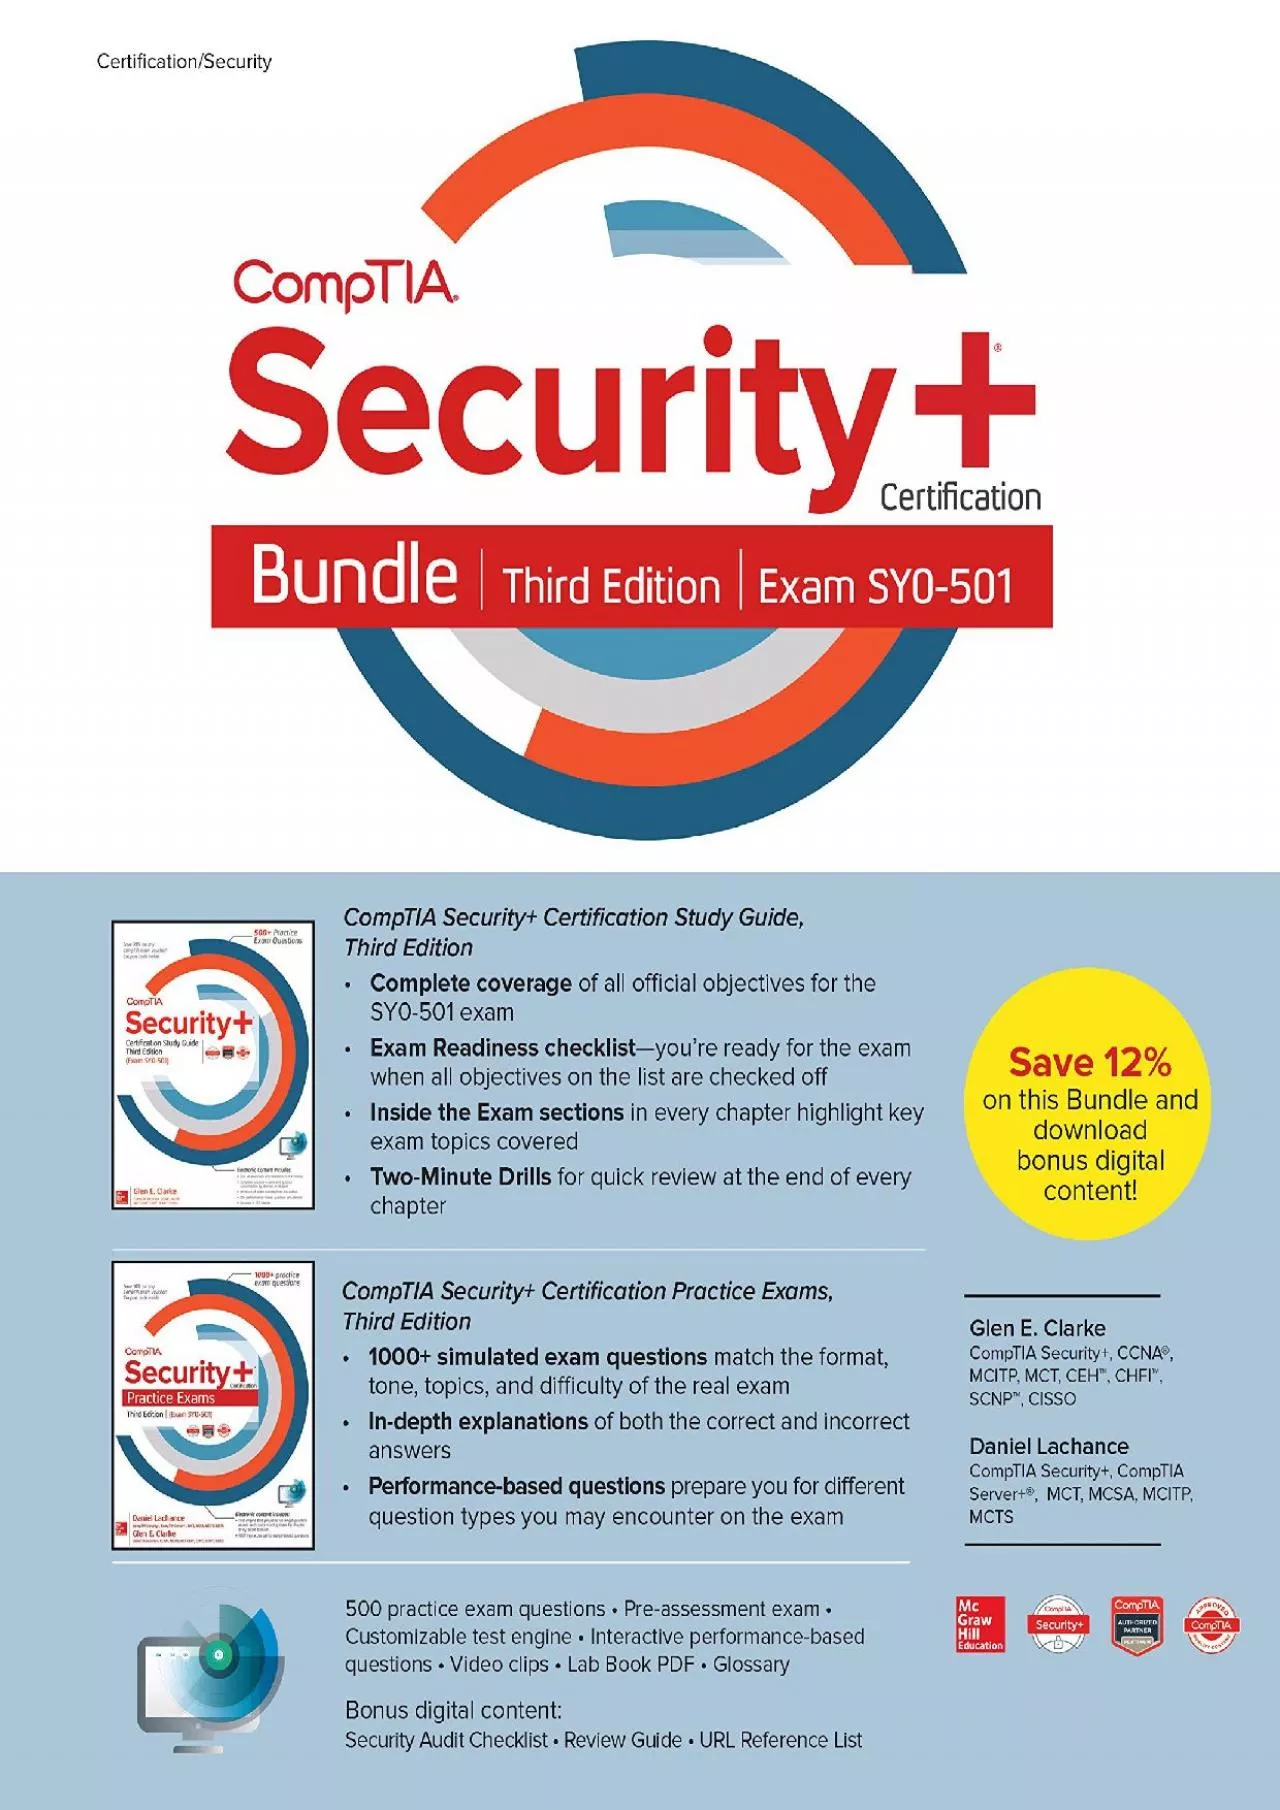 [FREE]-CompTIA Security+ Certification Bundle, Third Edition (Exam SY0-501)